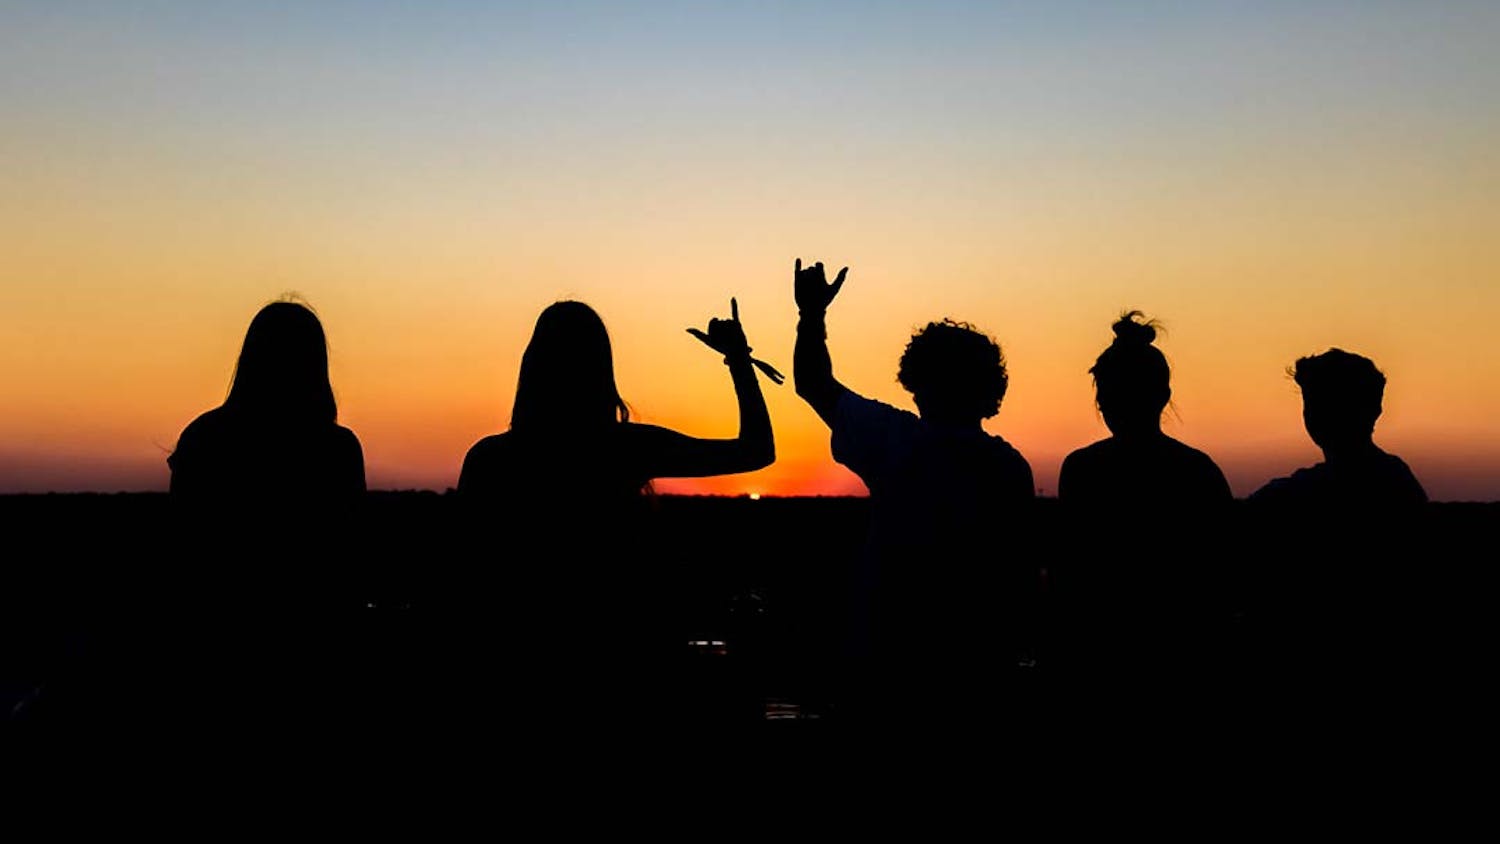 Students on the top of Horizon Garage watching the sunset on Sept. 21, 2022. The parking garage is located at 519 Main St, Columbia, SC, and offers great views of the city skyline.